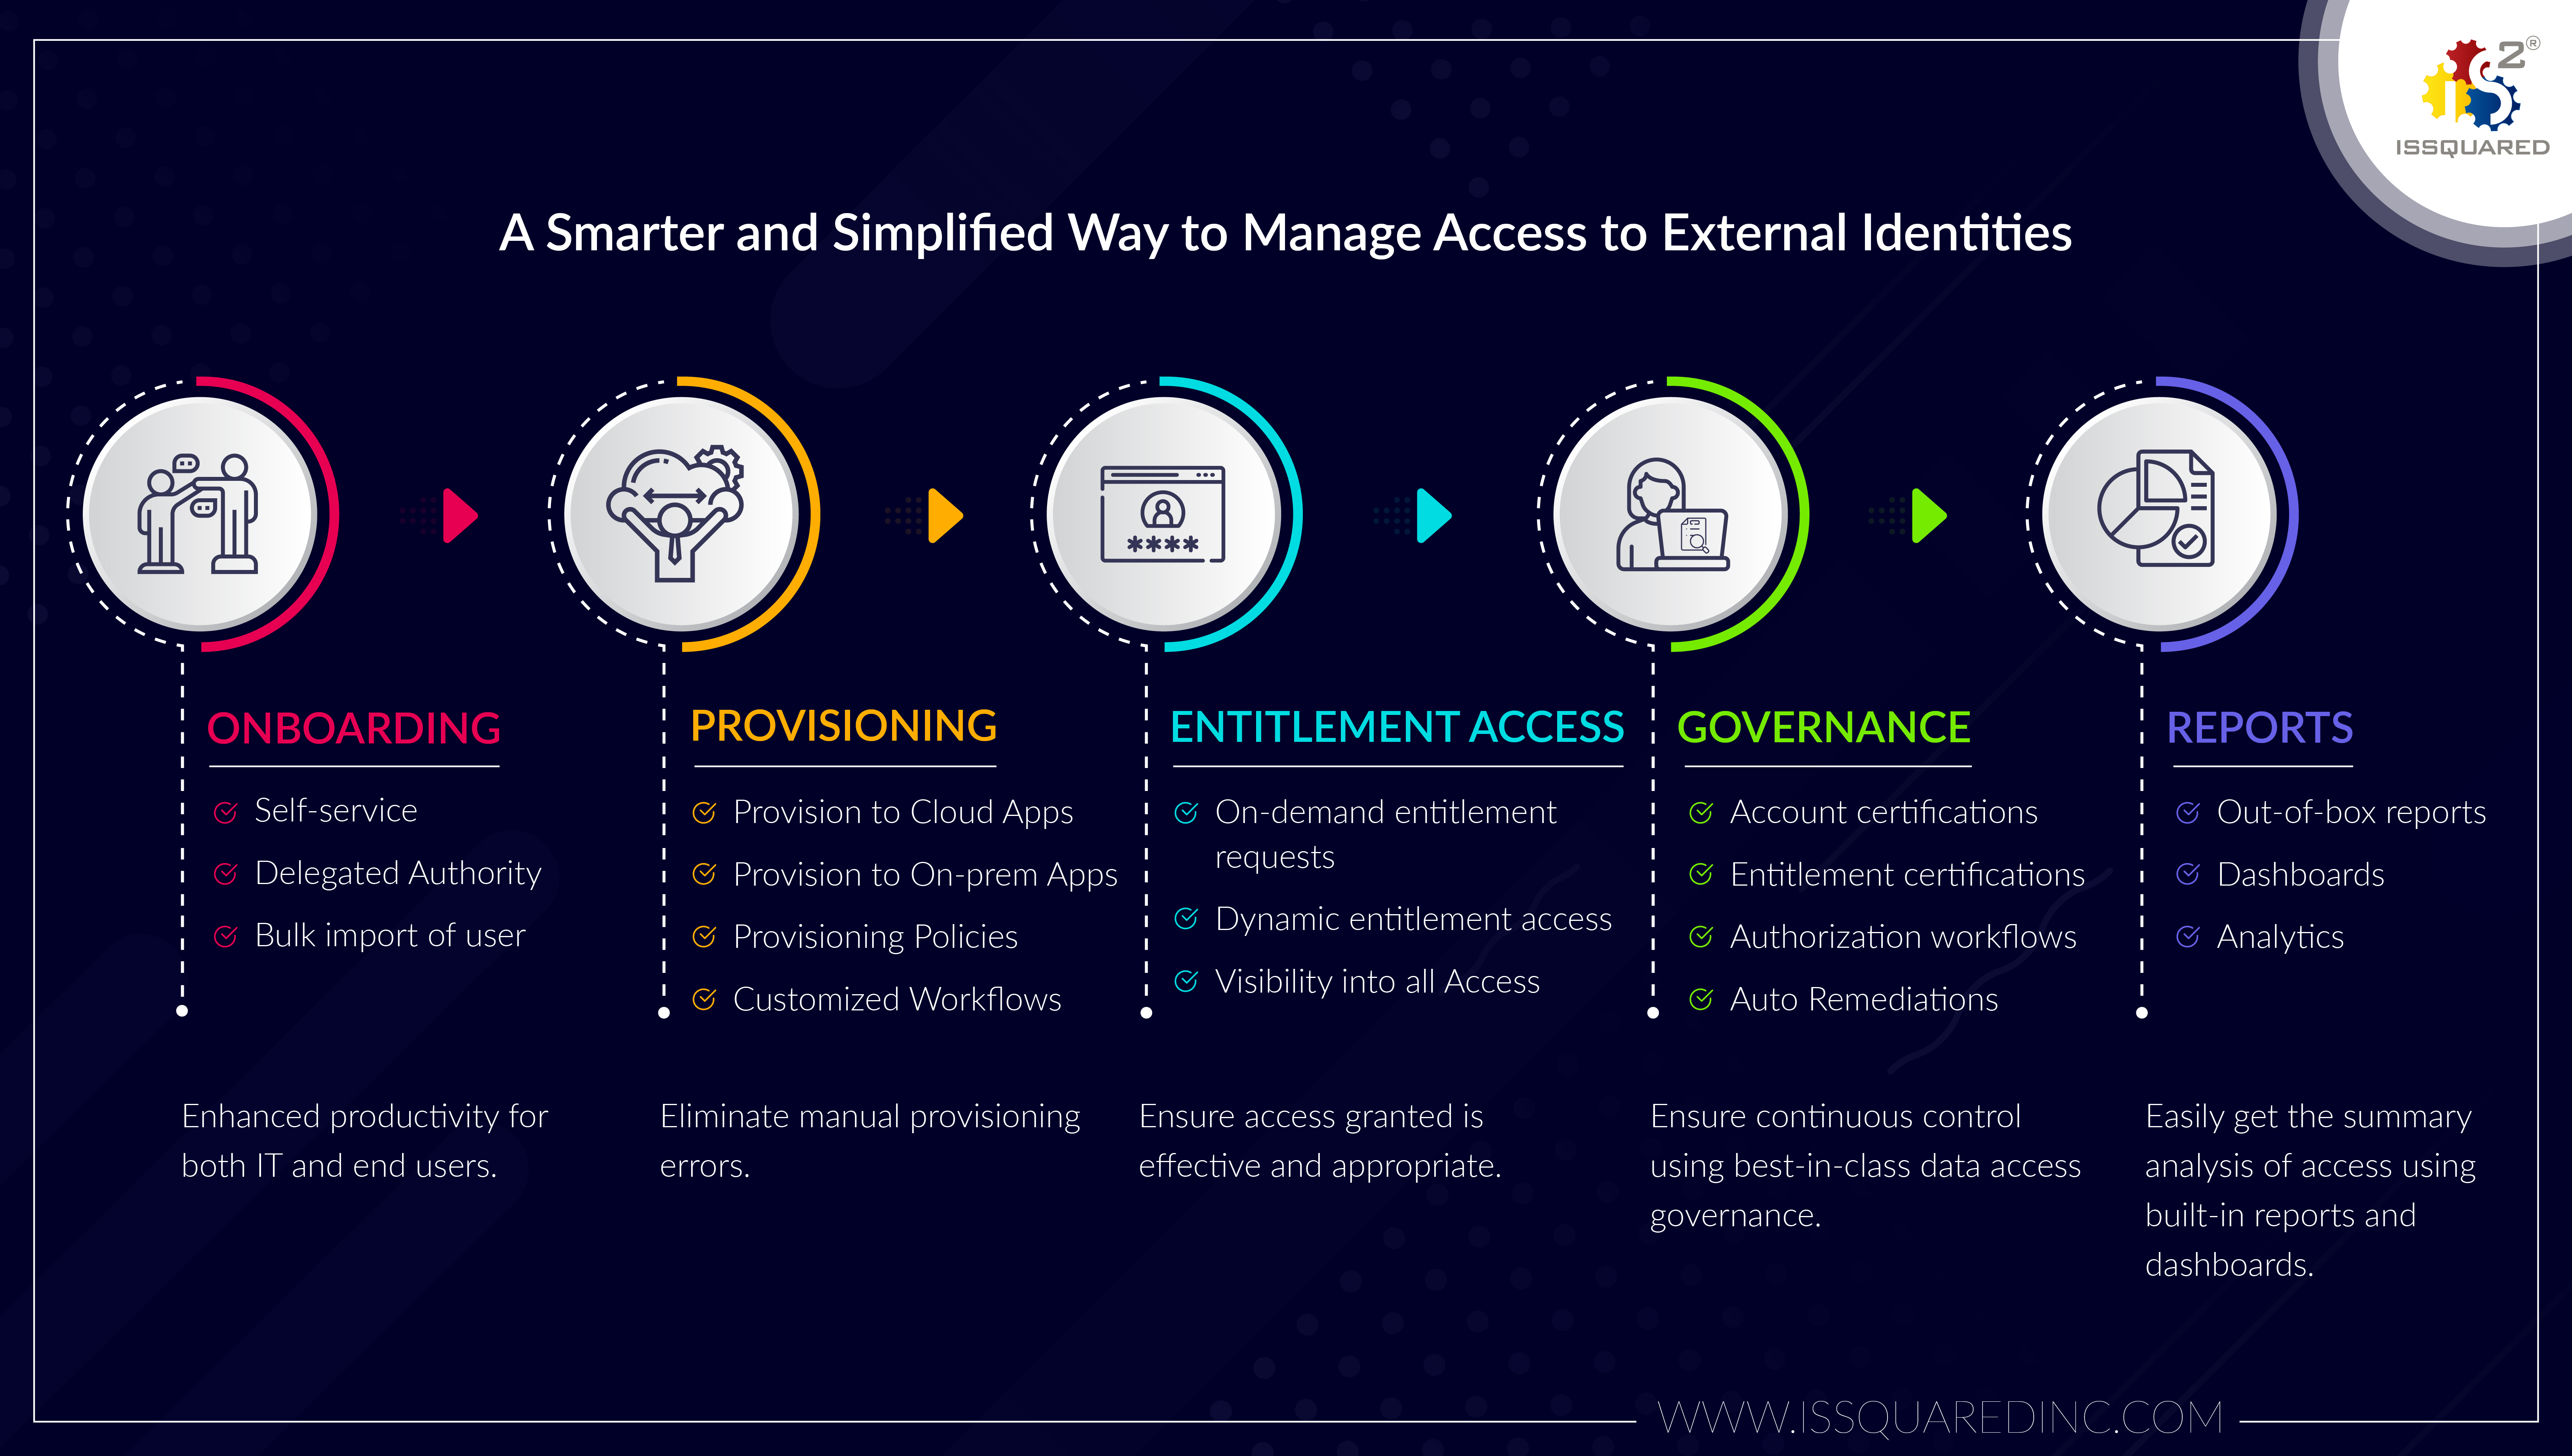 Key Benefits of ISSQUARED®’s
External Identity Access & Governance (EIAG)